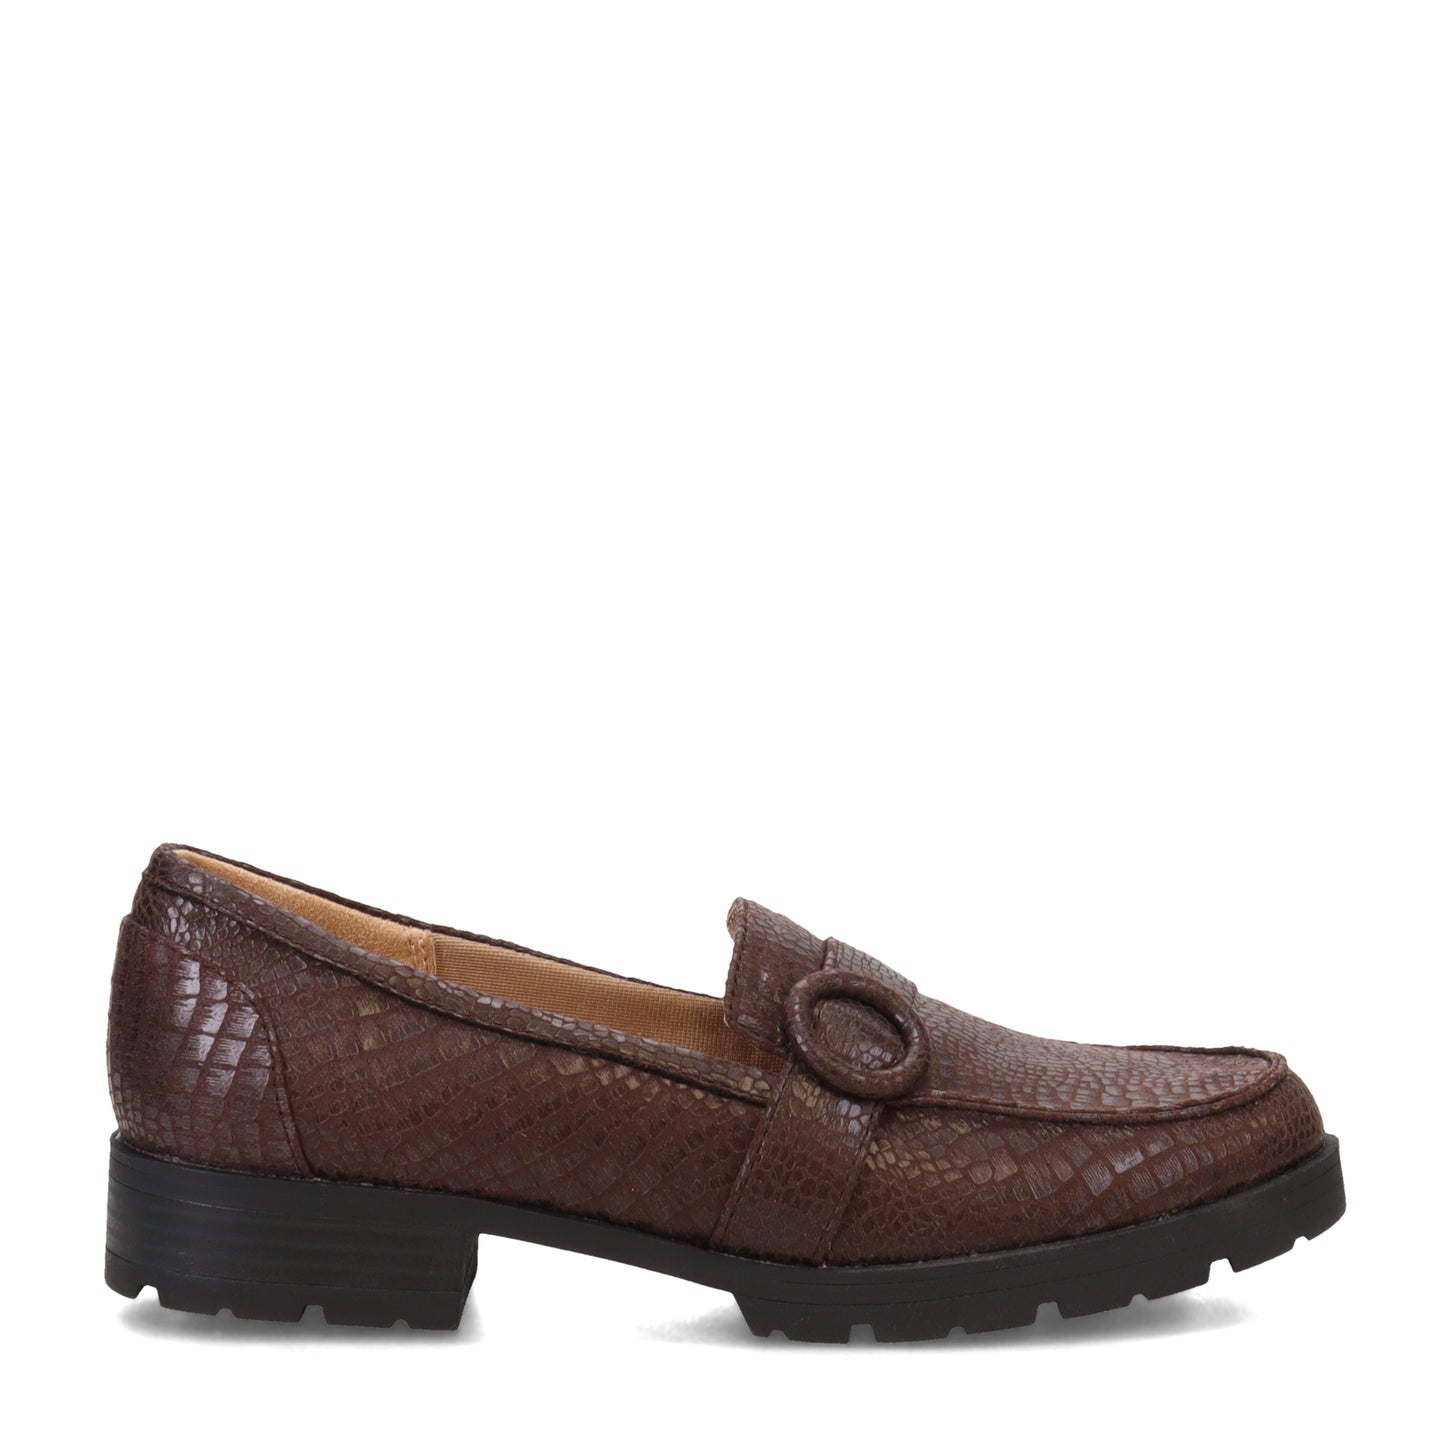 Peltz Shoes  Women's LifeStride Lolly Loafer CHOCOLATE I1931F3201